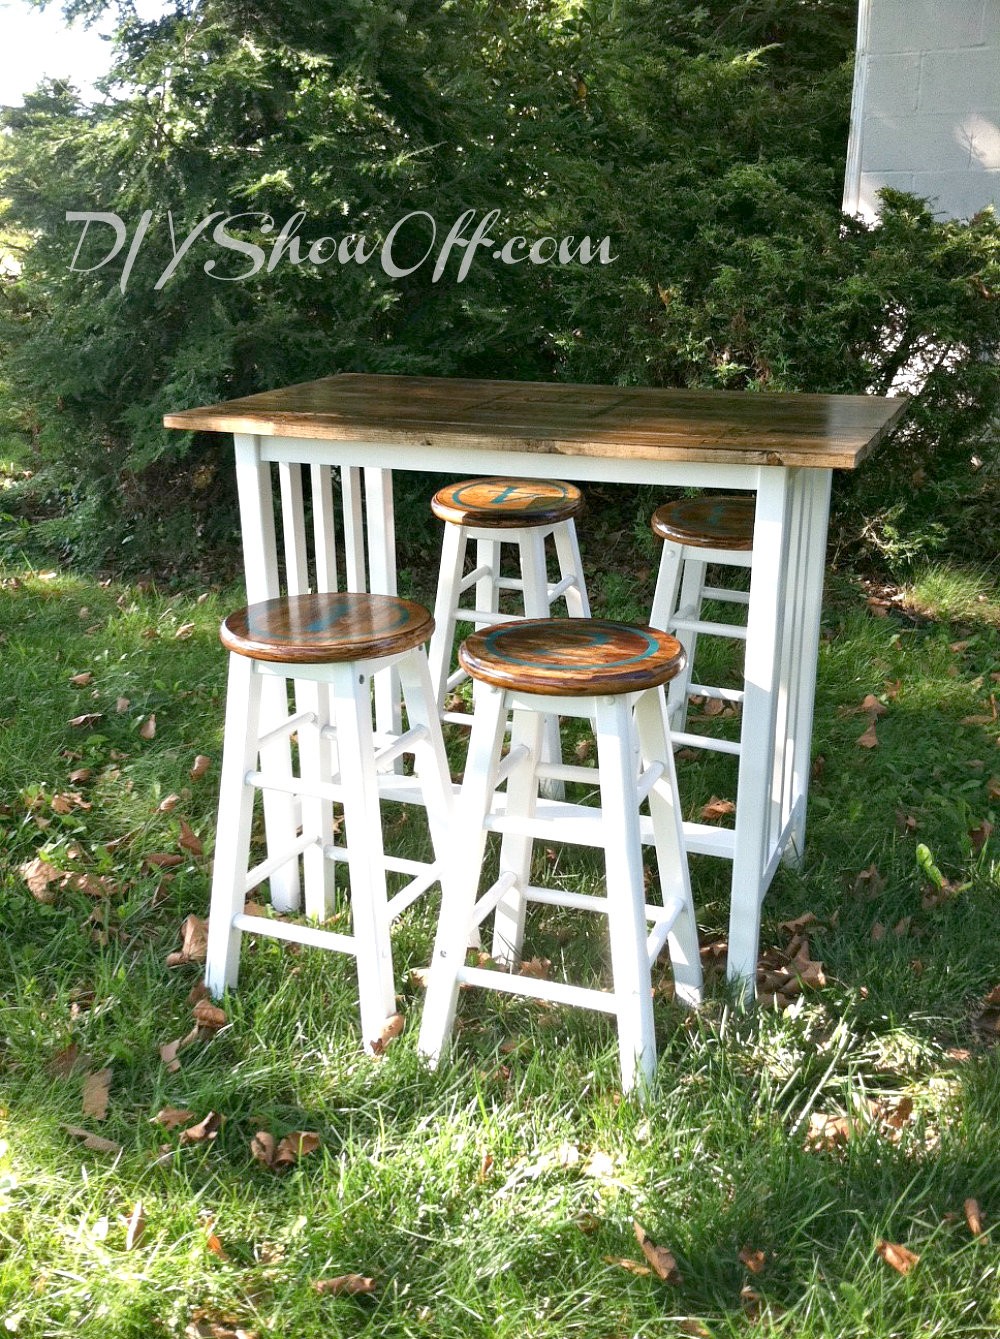 Portable Kitchen Islands With Breakfast Bar Ideas On Foter